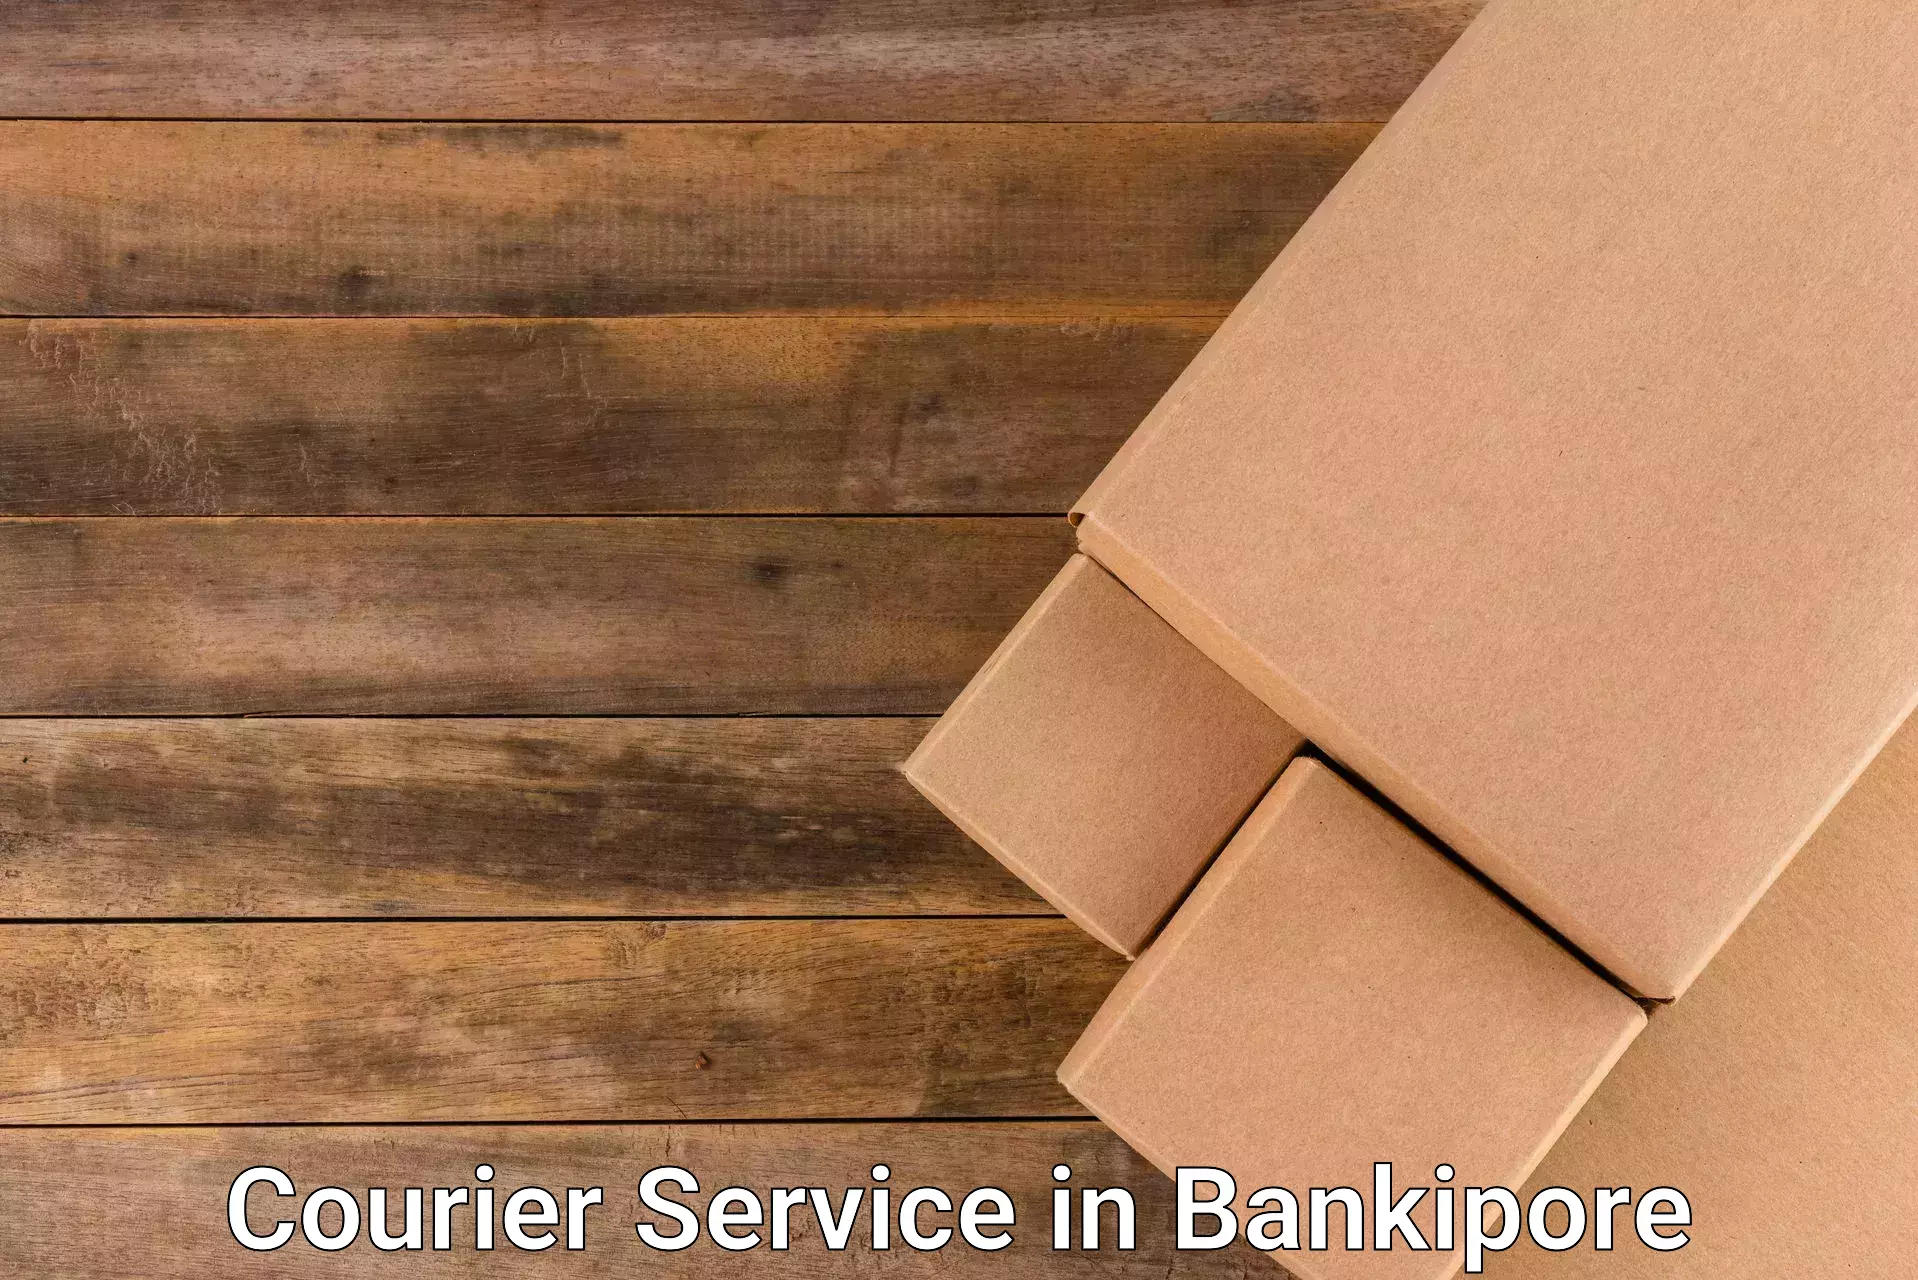 Secure freight services in Bankipore